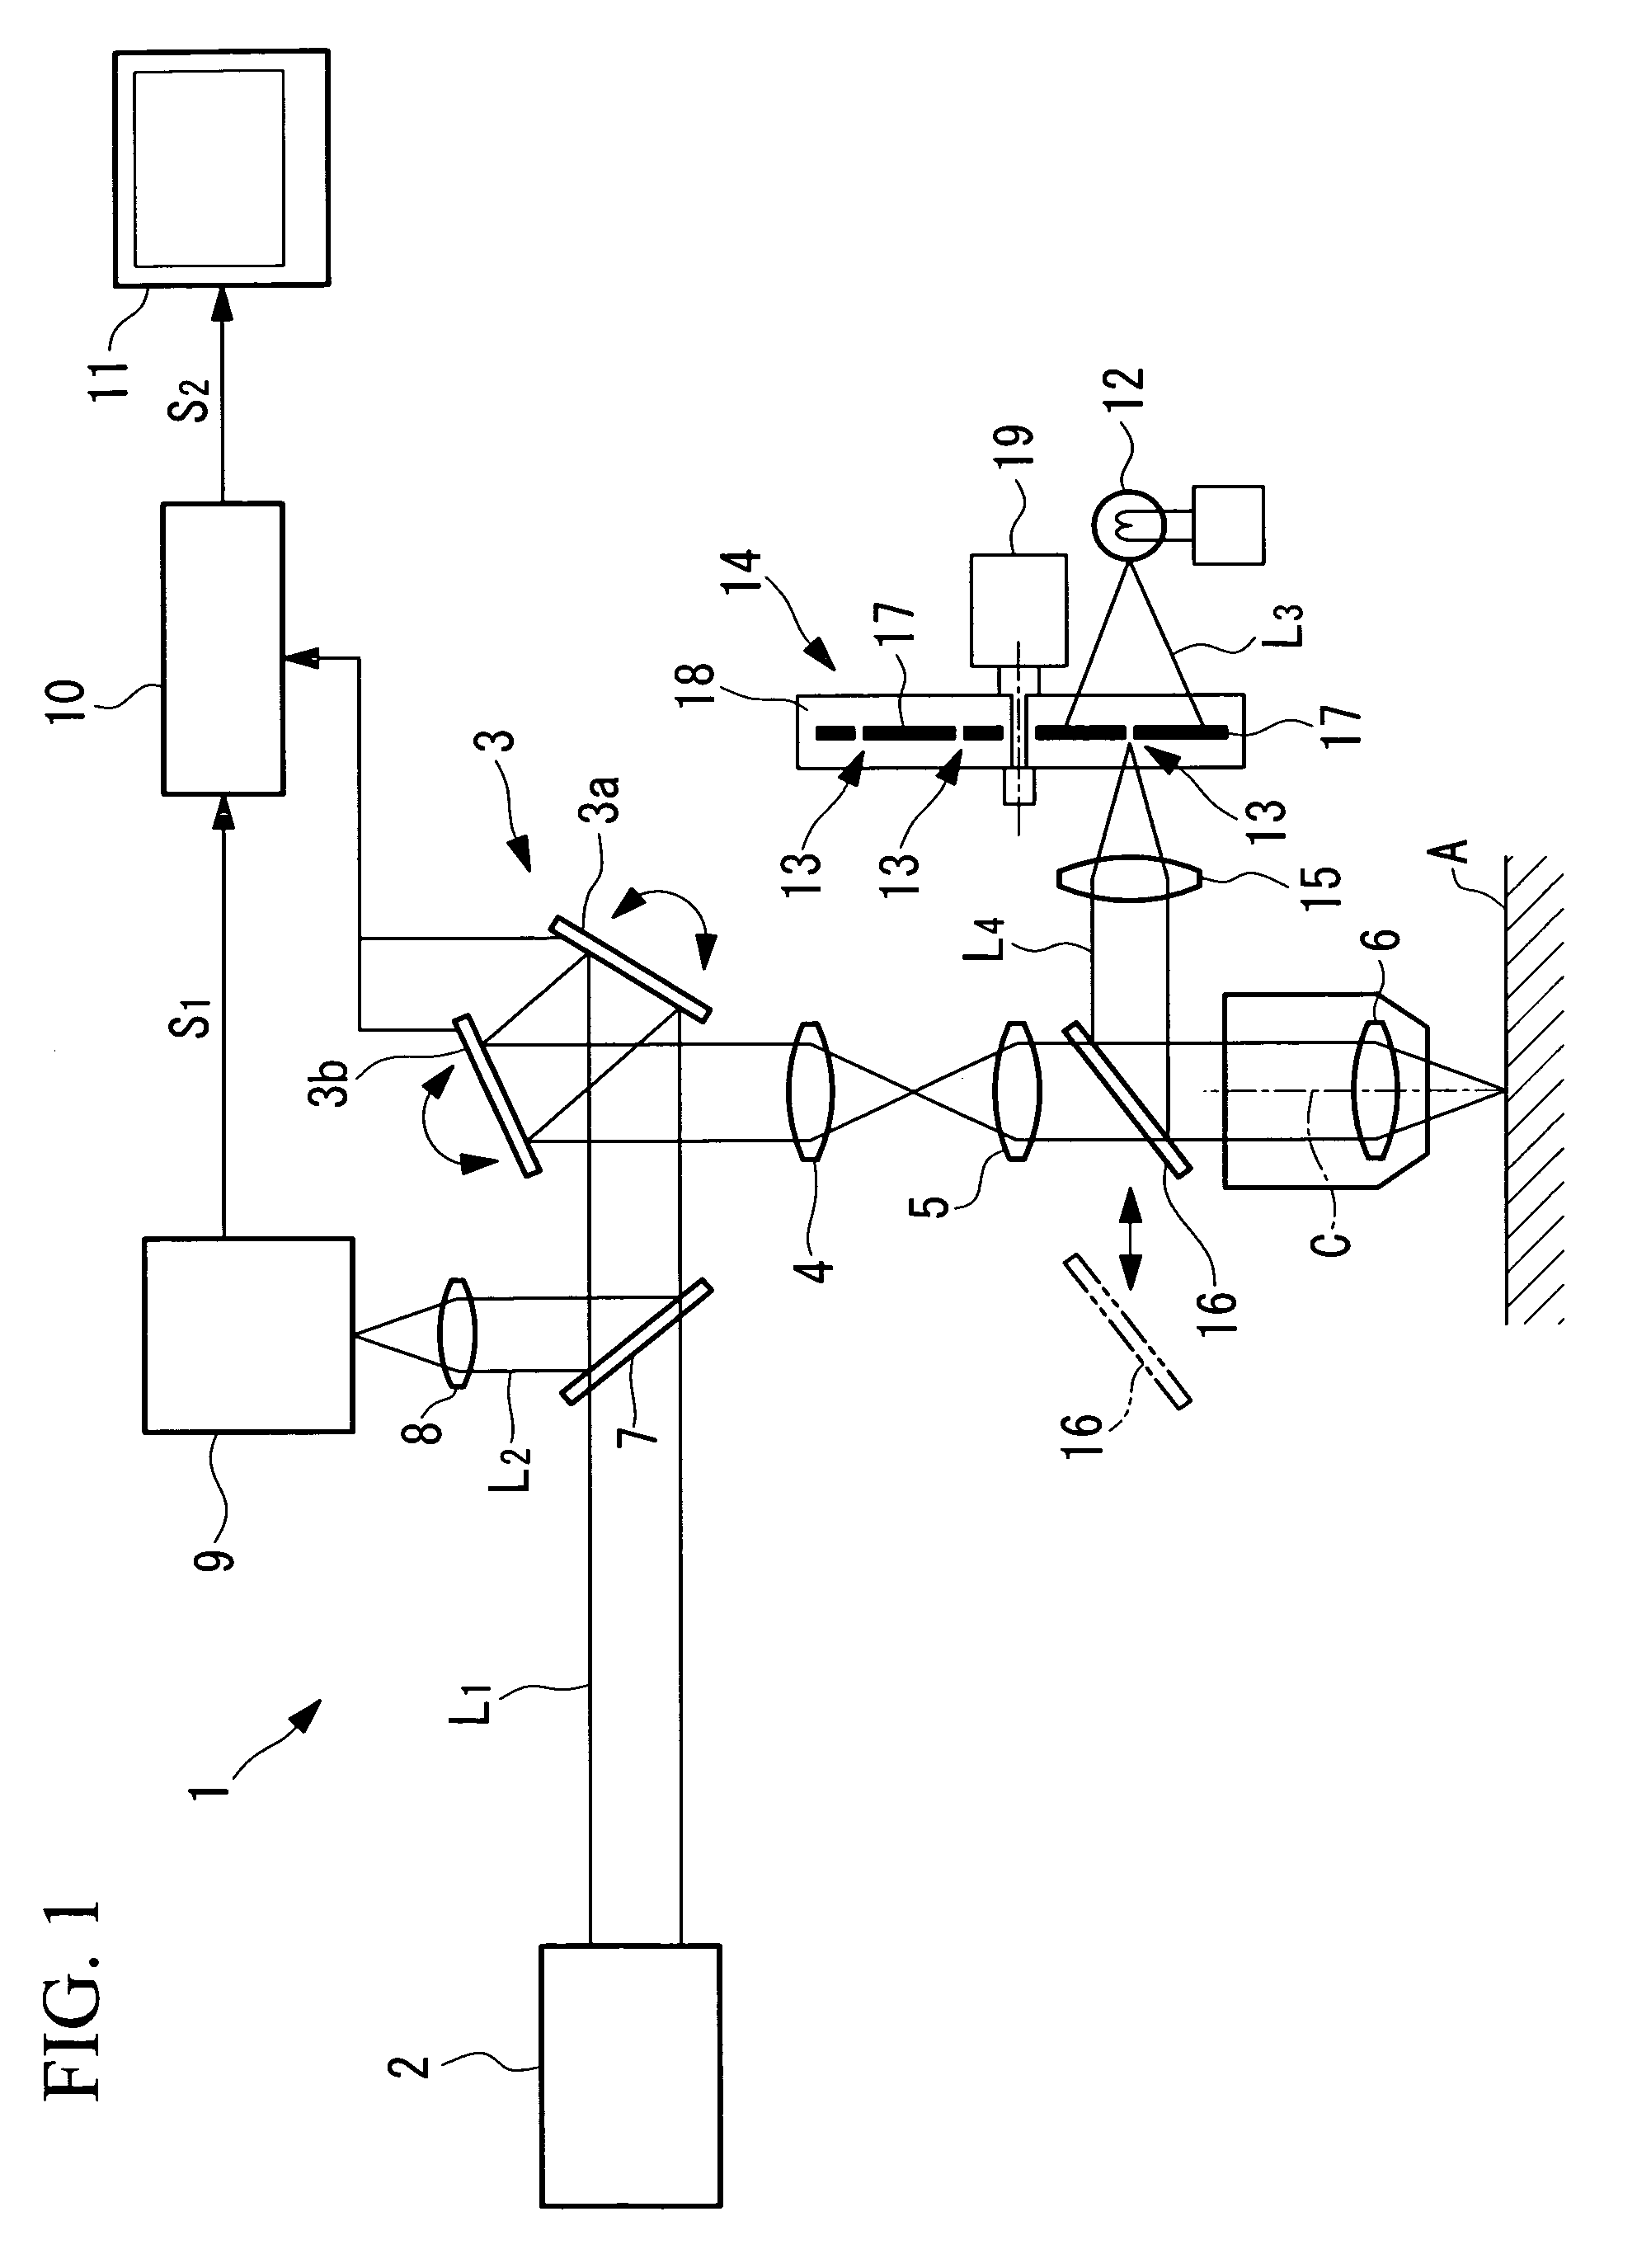 Scanning examination apparatus, lens unit, and objective-lens adaptor